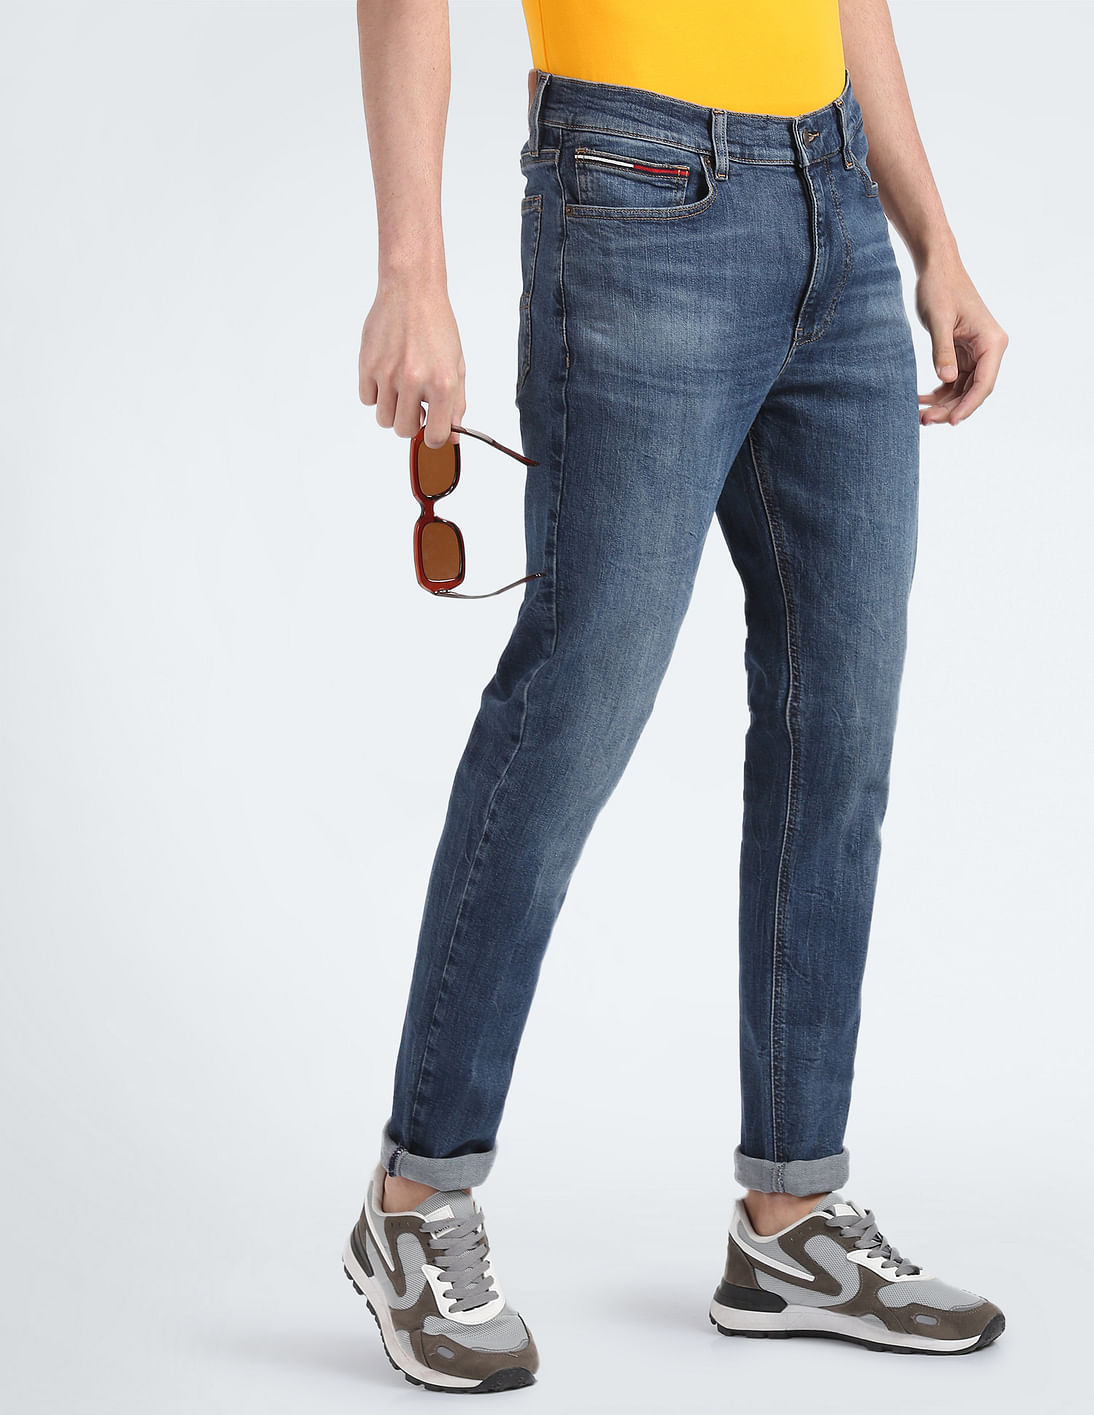 Buy Tommy Hilfiger Simon Skinny Whiskered Jeans - NNNOW.com